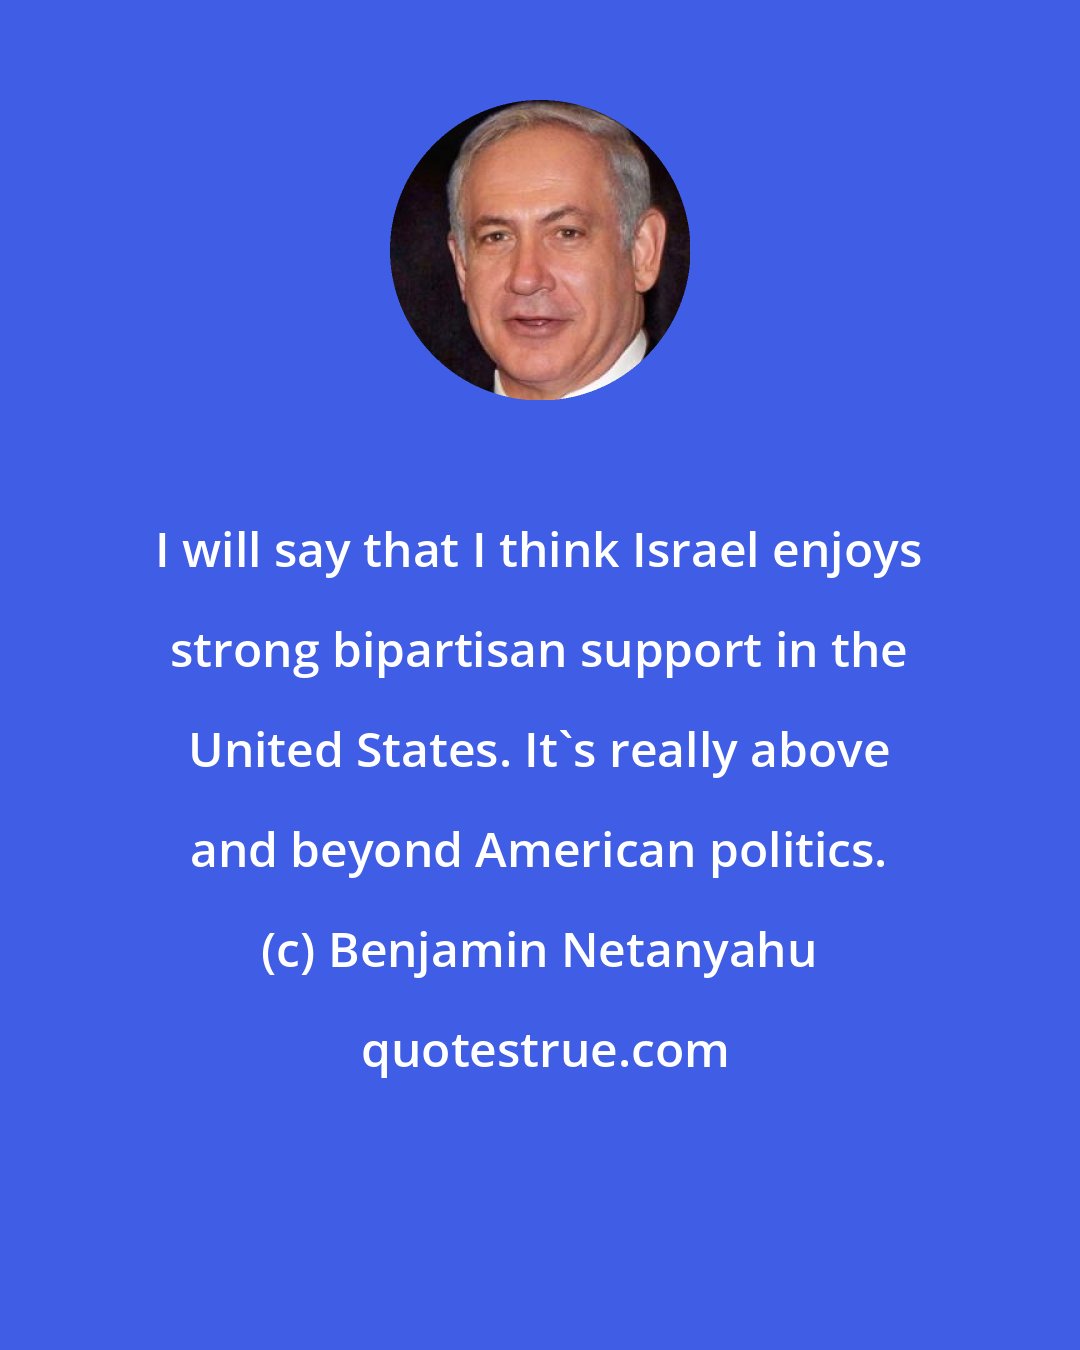 Benjamin Netanyahu: I will say that I think Israel enjoys strong bipartisan support in the United States. It's really above and beyond American politics.